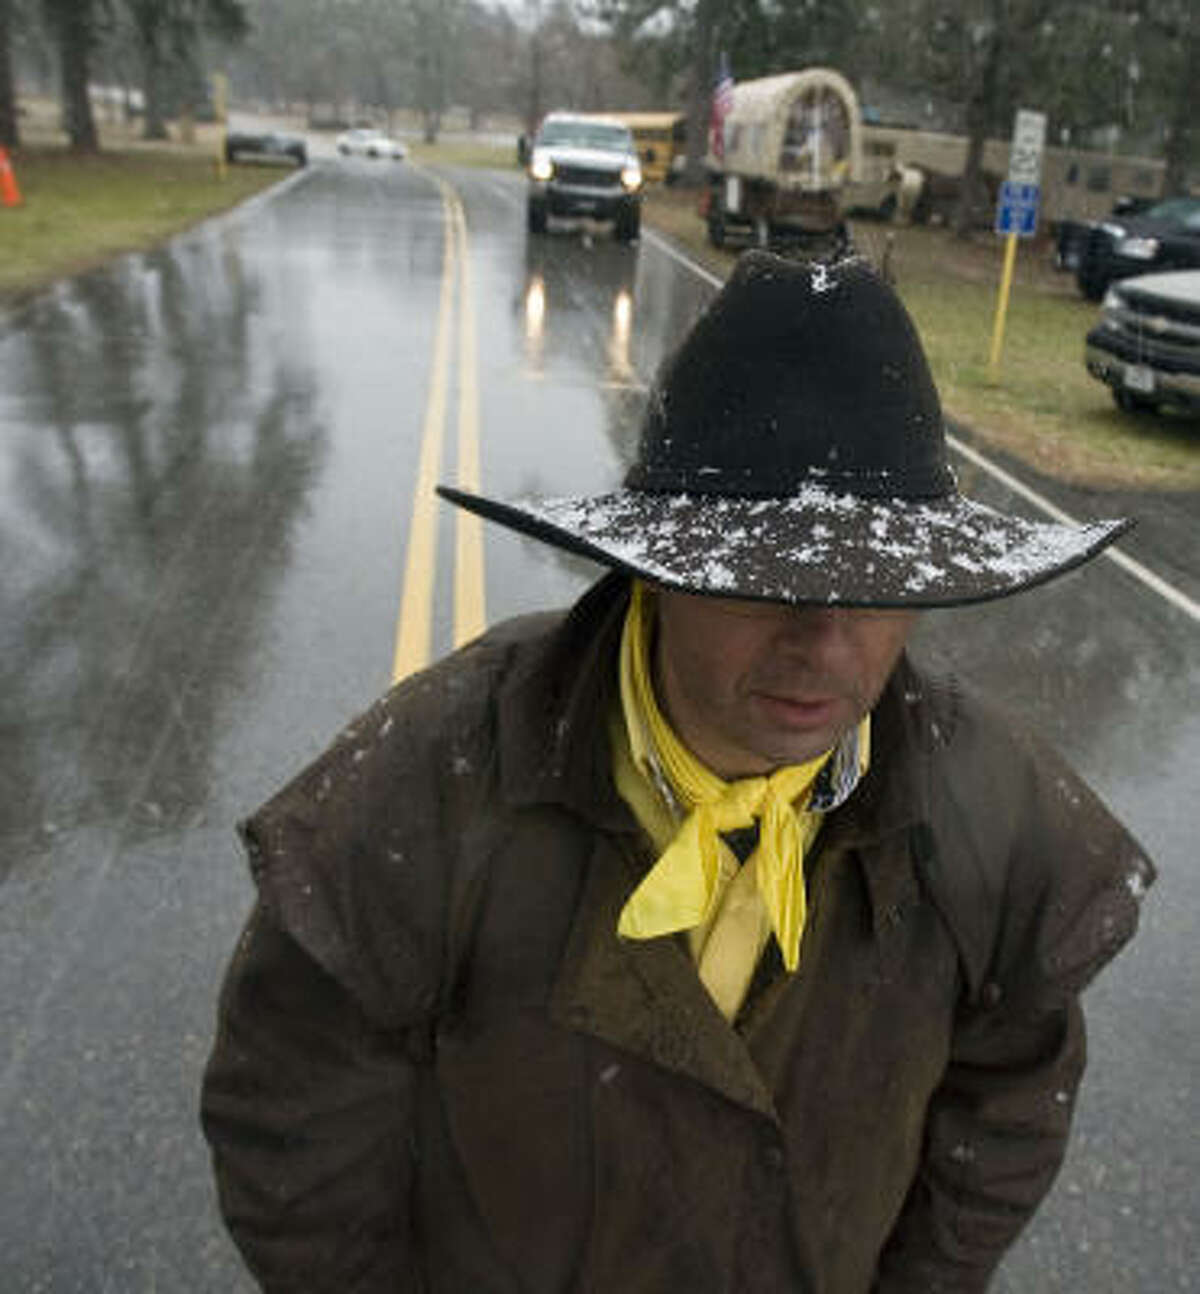 Dion Vandenbosch with the Sam Houston Trail Ride walks through snow and sleet Tuesday after the group stopped for the night at Spring Creek Park in Tomball.